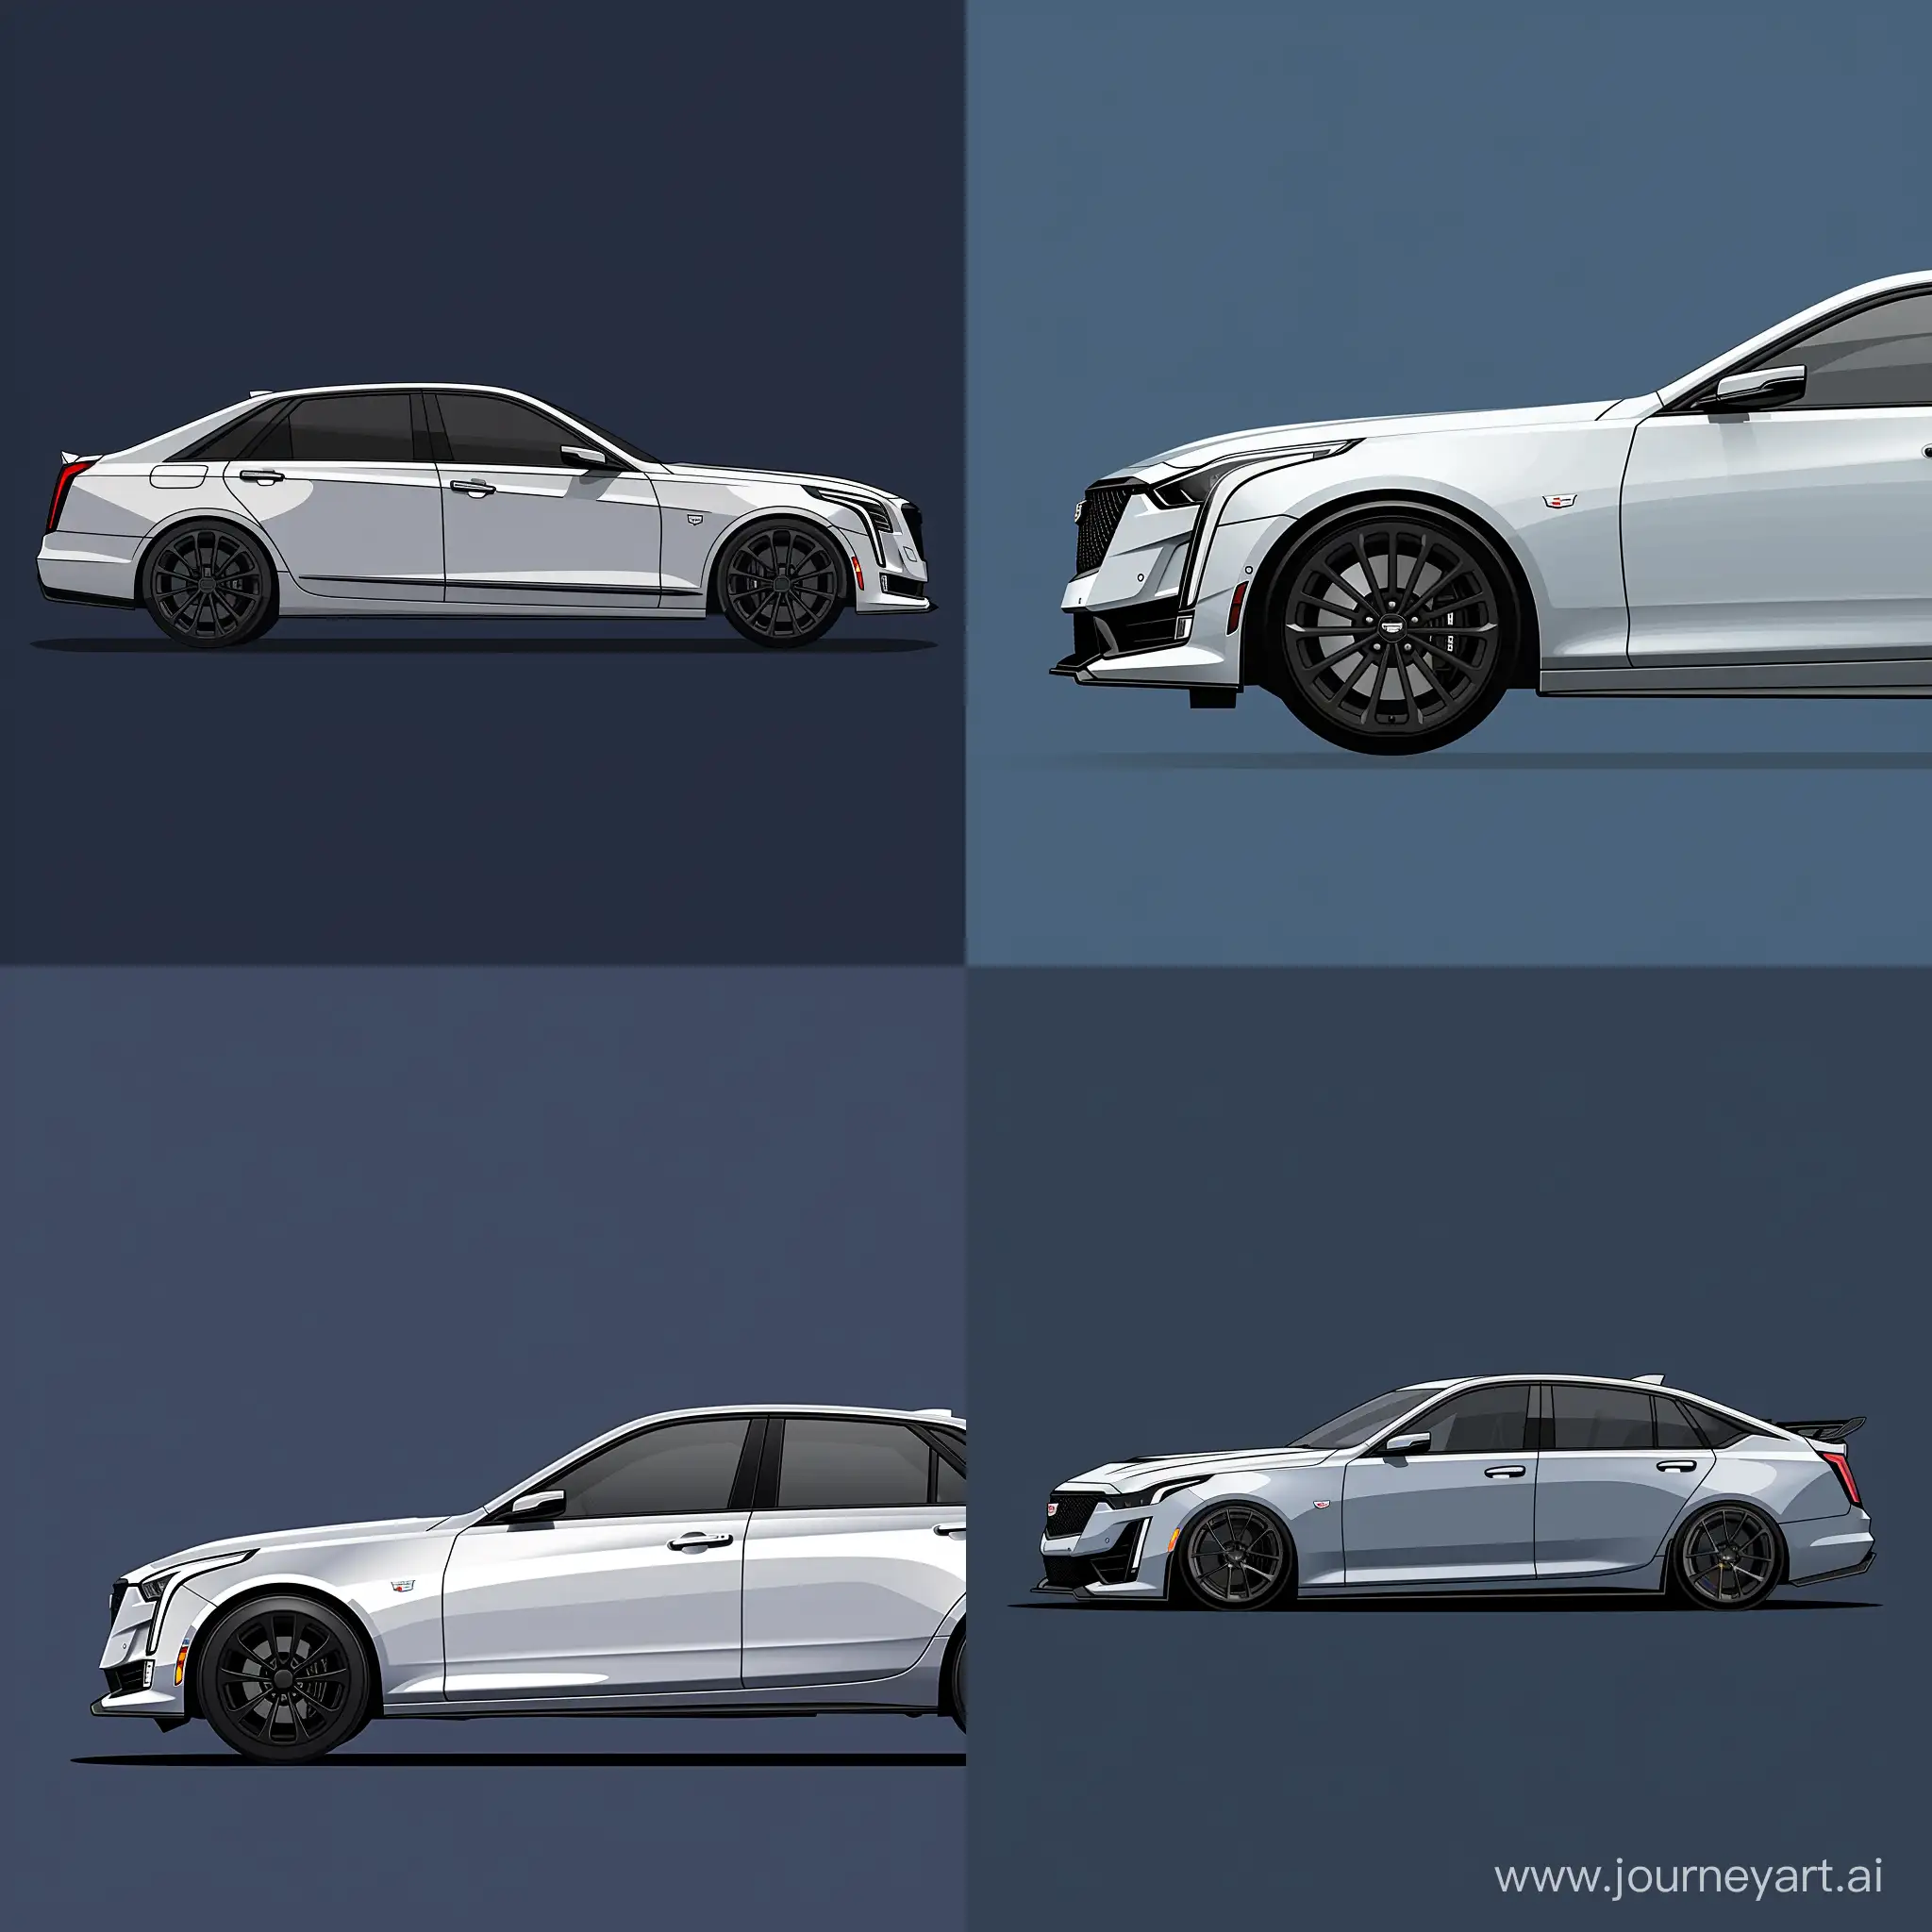 Sleek-Silver-Cadillac-CT5-with-Black-Rims-in-Minimalist-2D-Side-View-Illustration